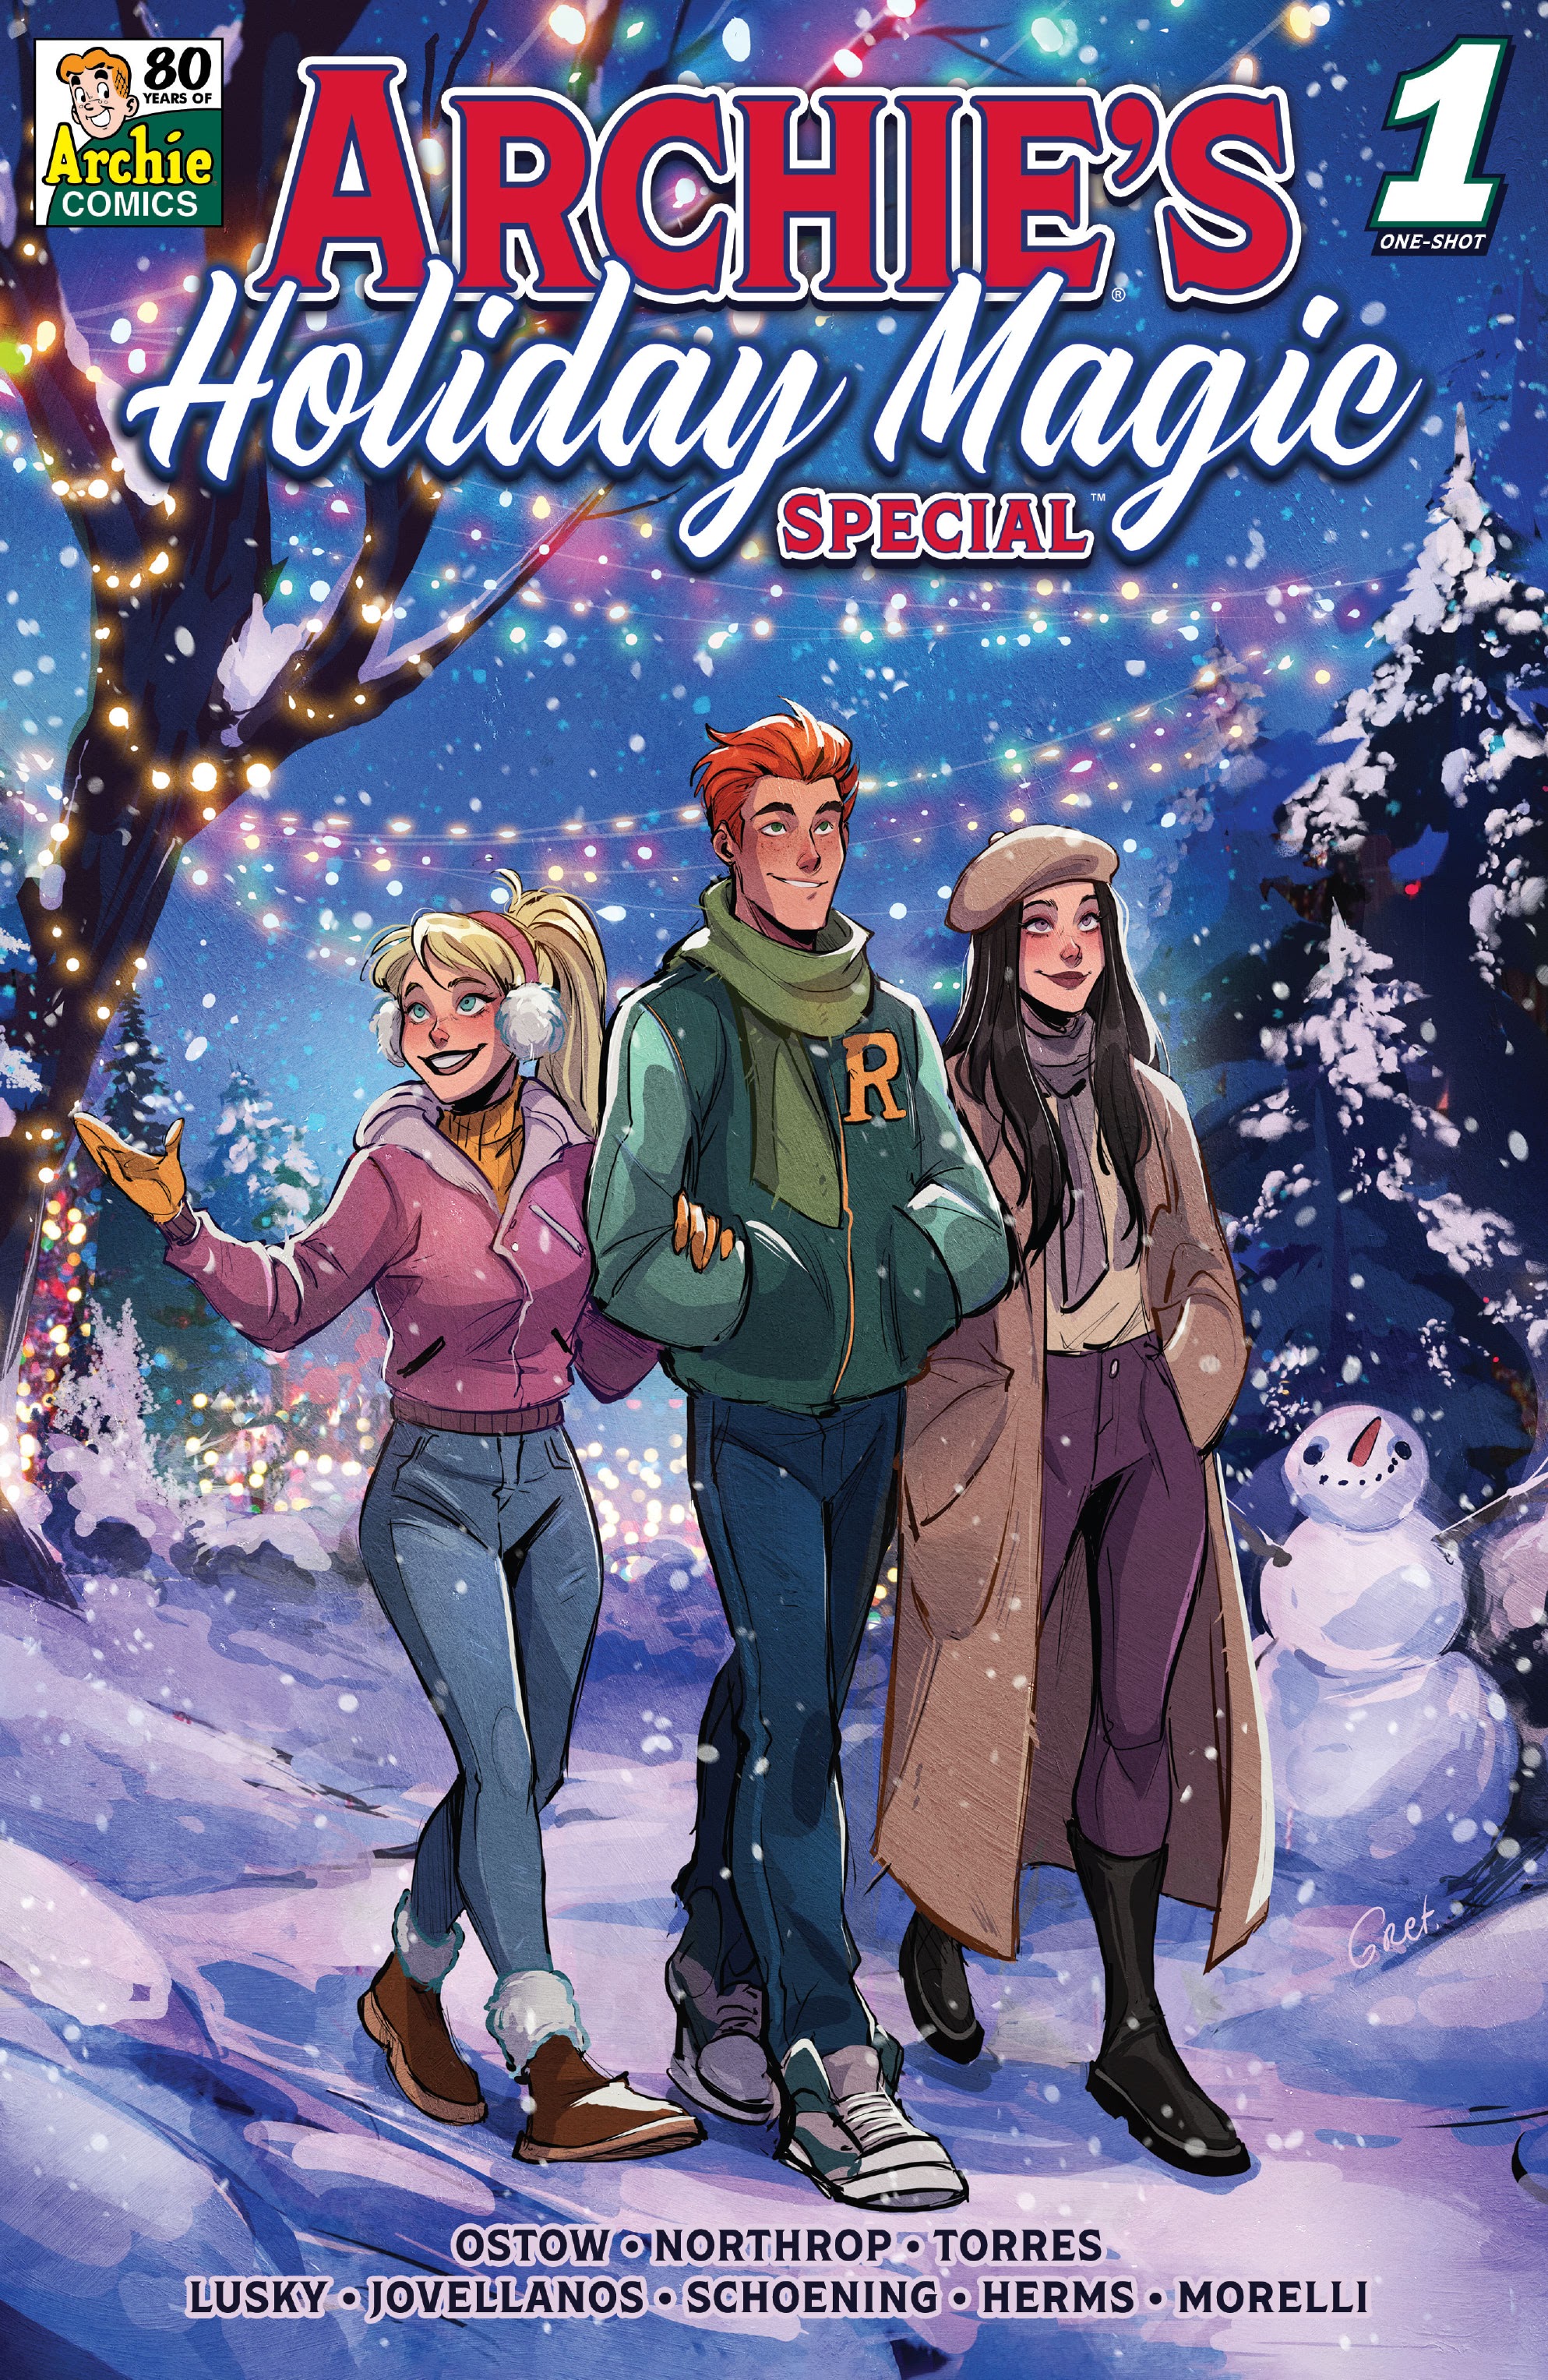 Read online Archie's Holiday Magic Special comic -  Issue # Full - 1